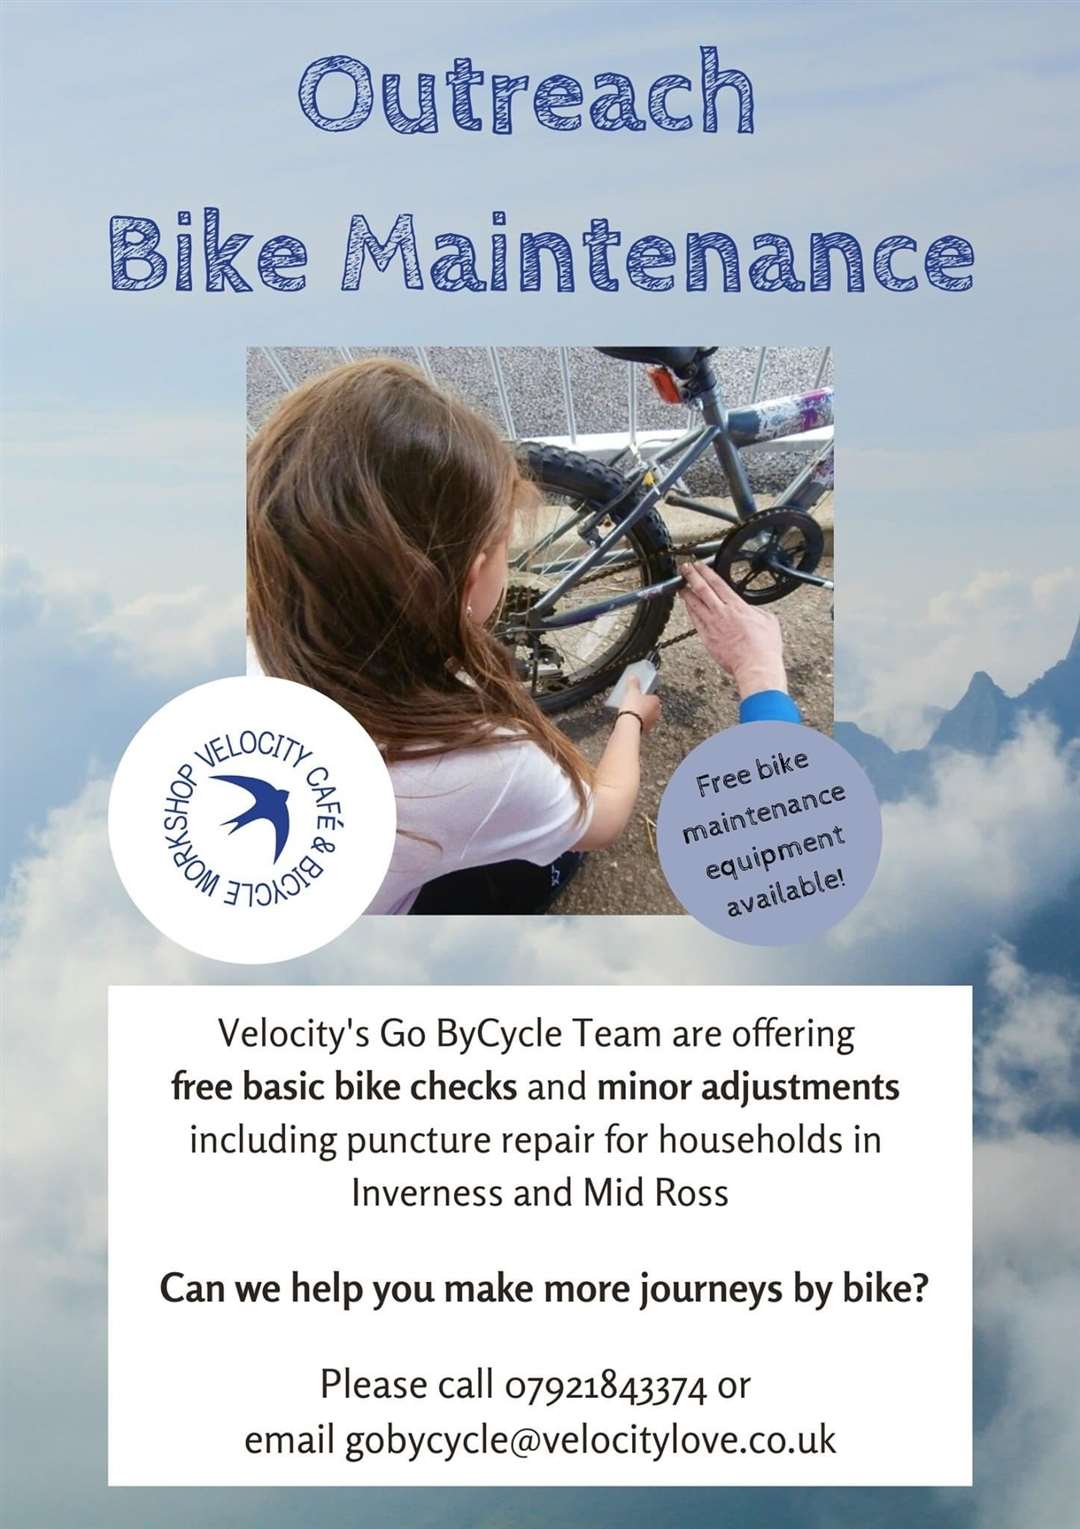 The project is running a series of free cycling sessions.